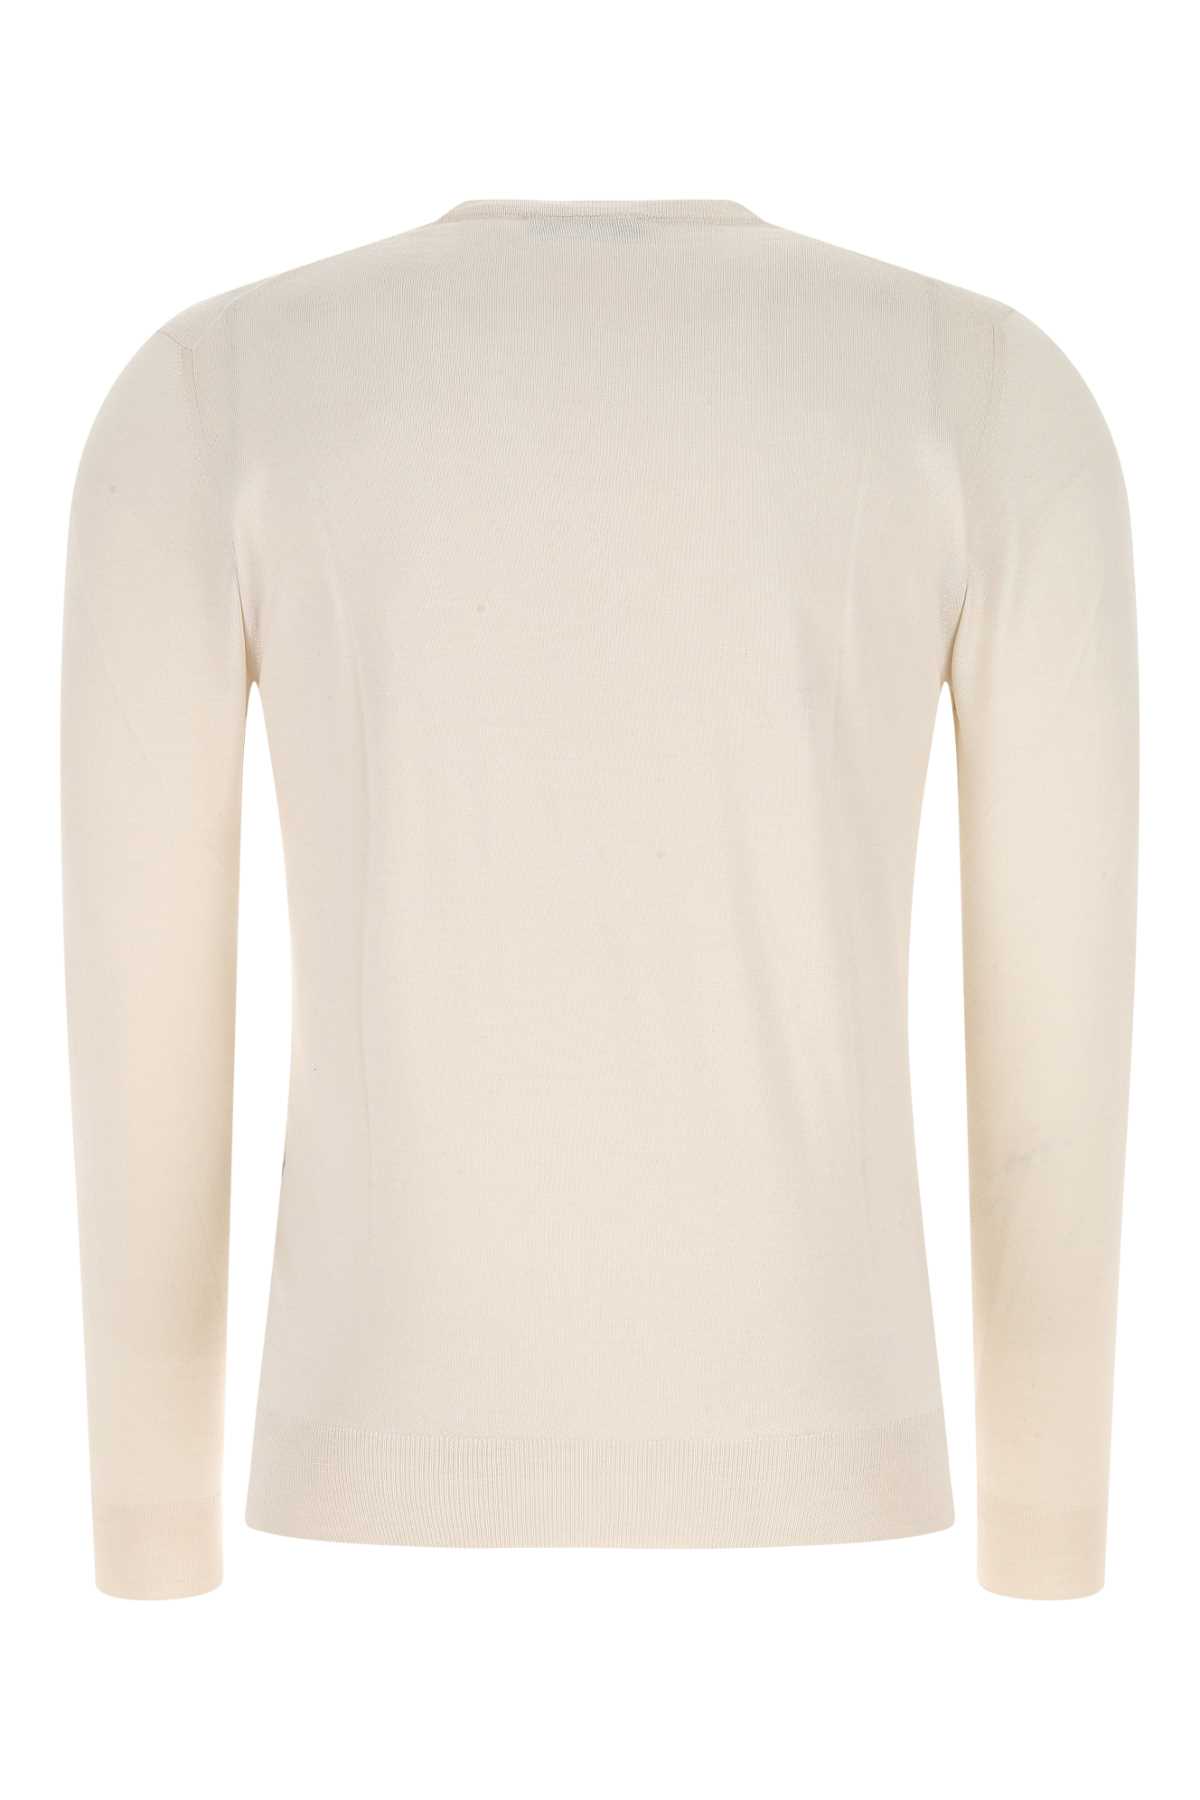 Fedeli Ivory Cashmere Blend Sweater In 40